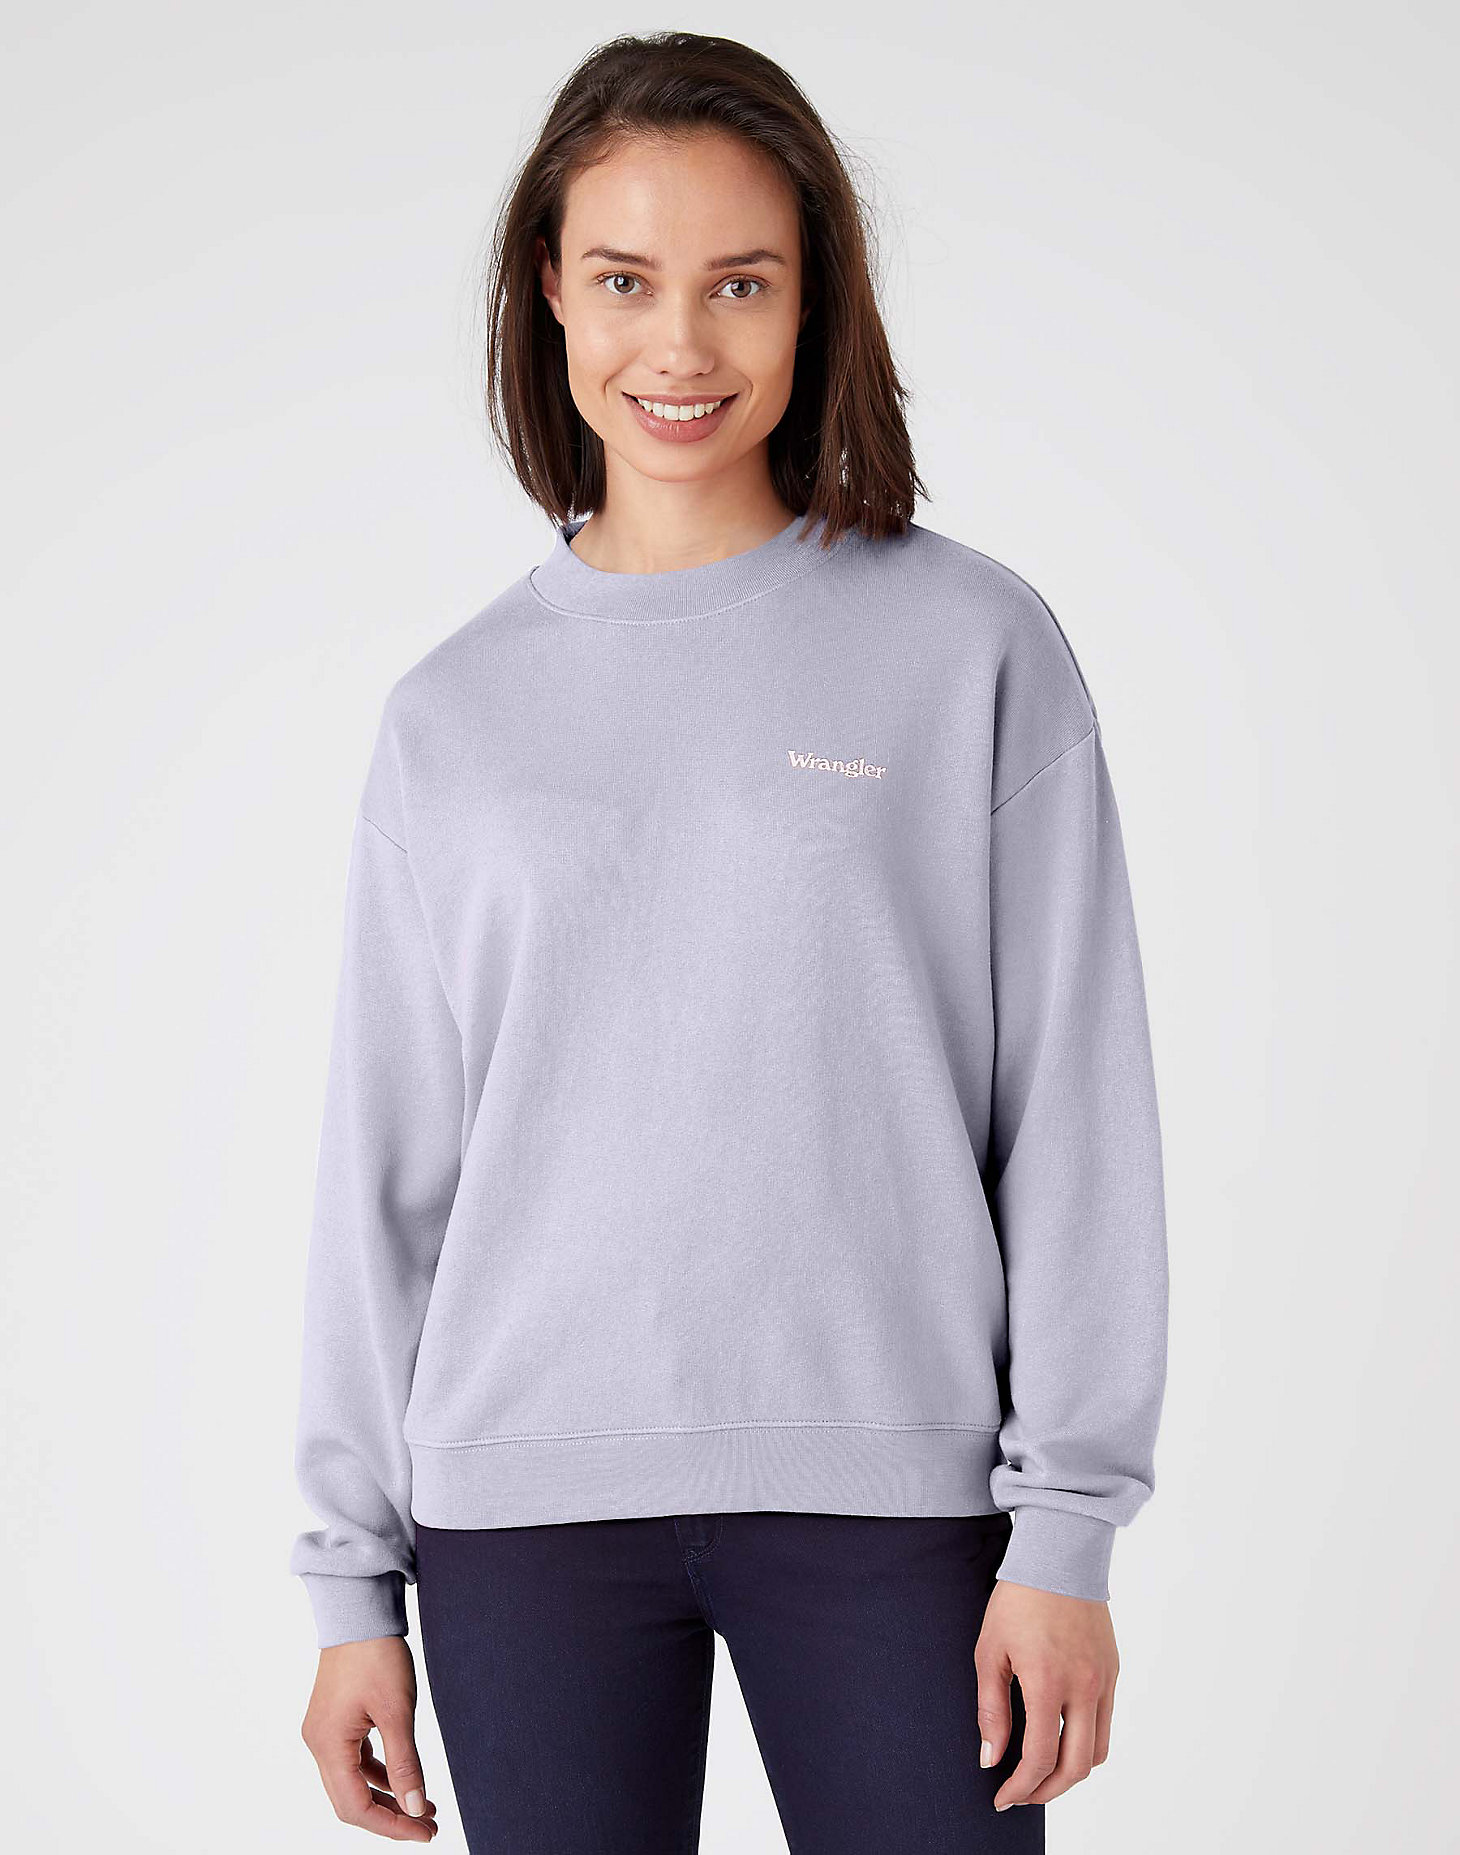 Retro Logo Sweater in Heirloom Lilac main view